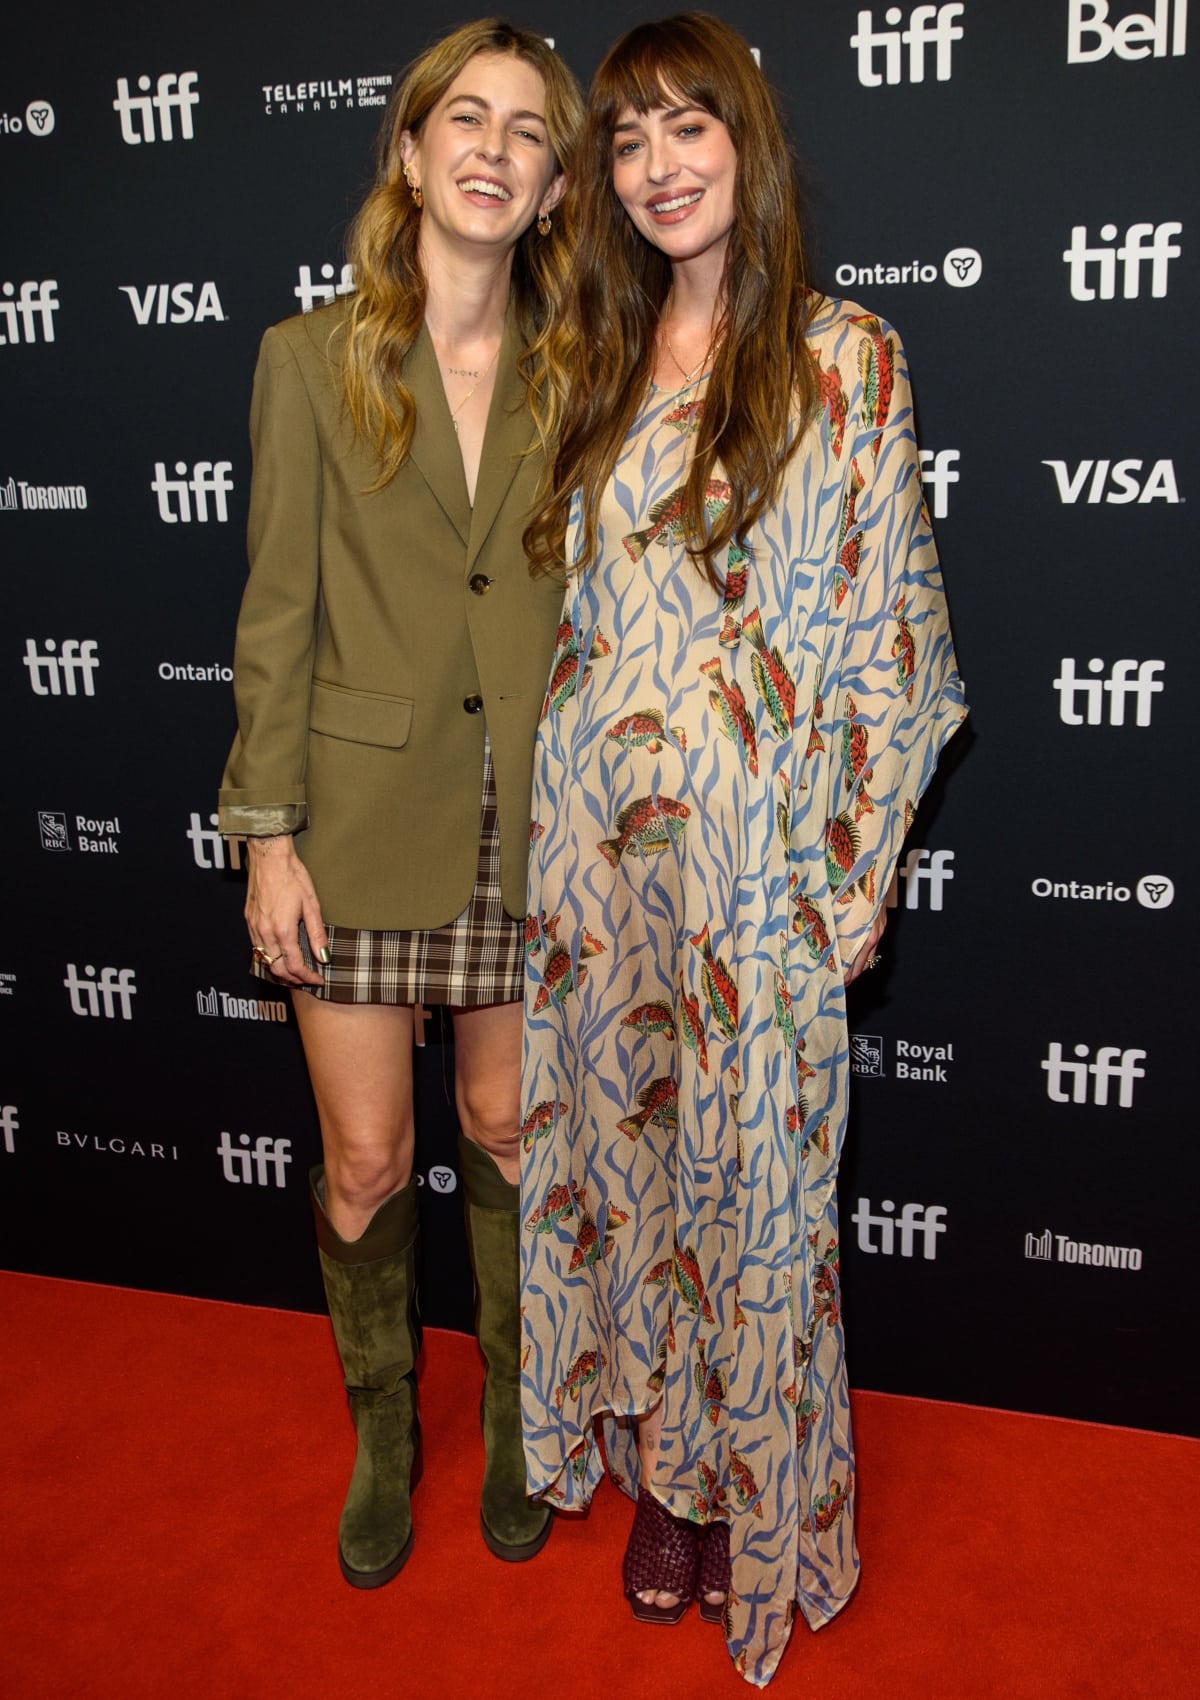 Dakota Johnson with Ro Donnelly at the Daddio premiere during the 48th Toronto International Film Festival